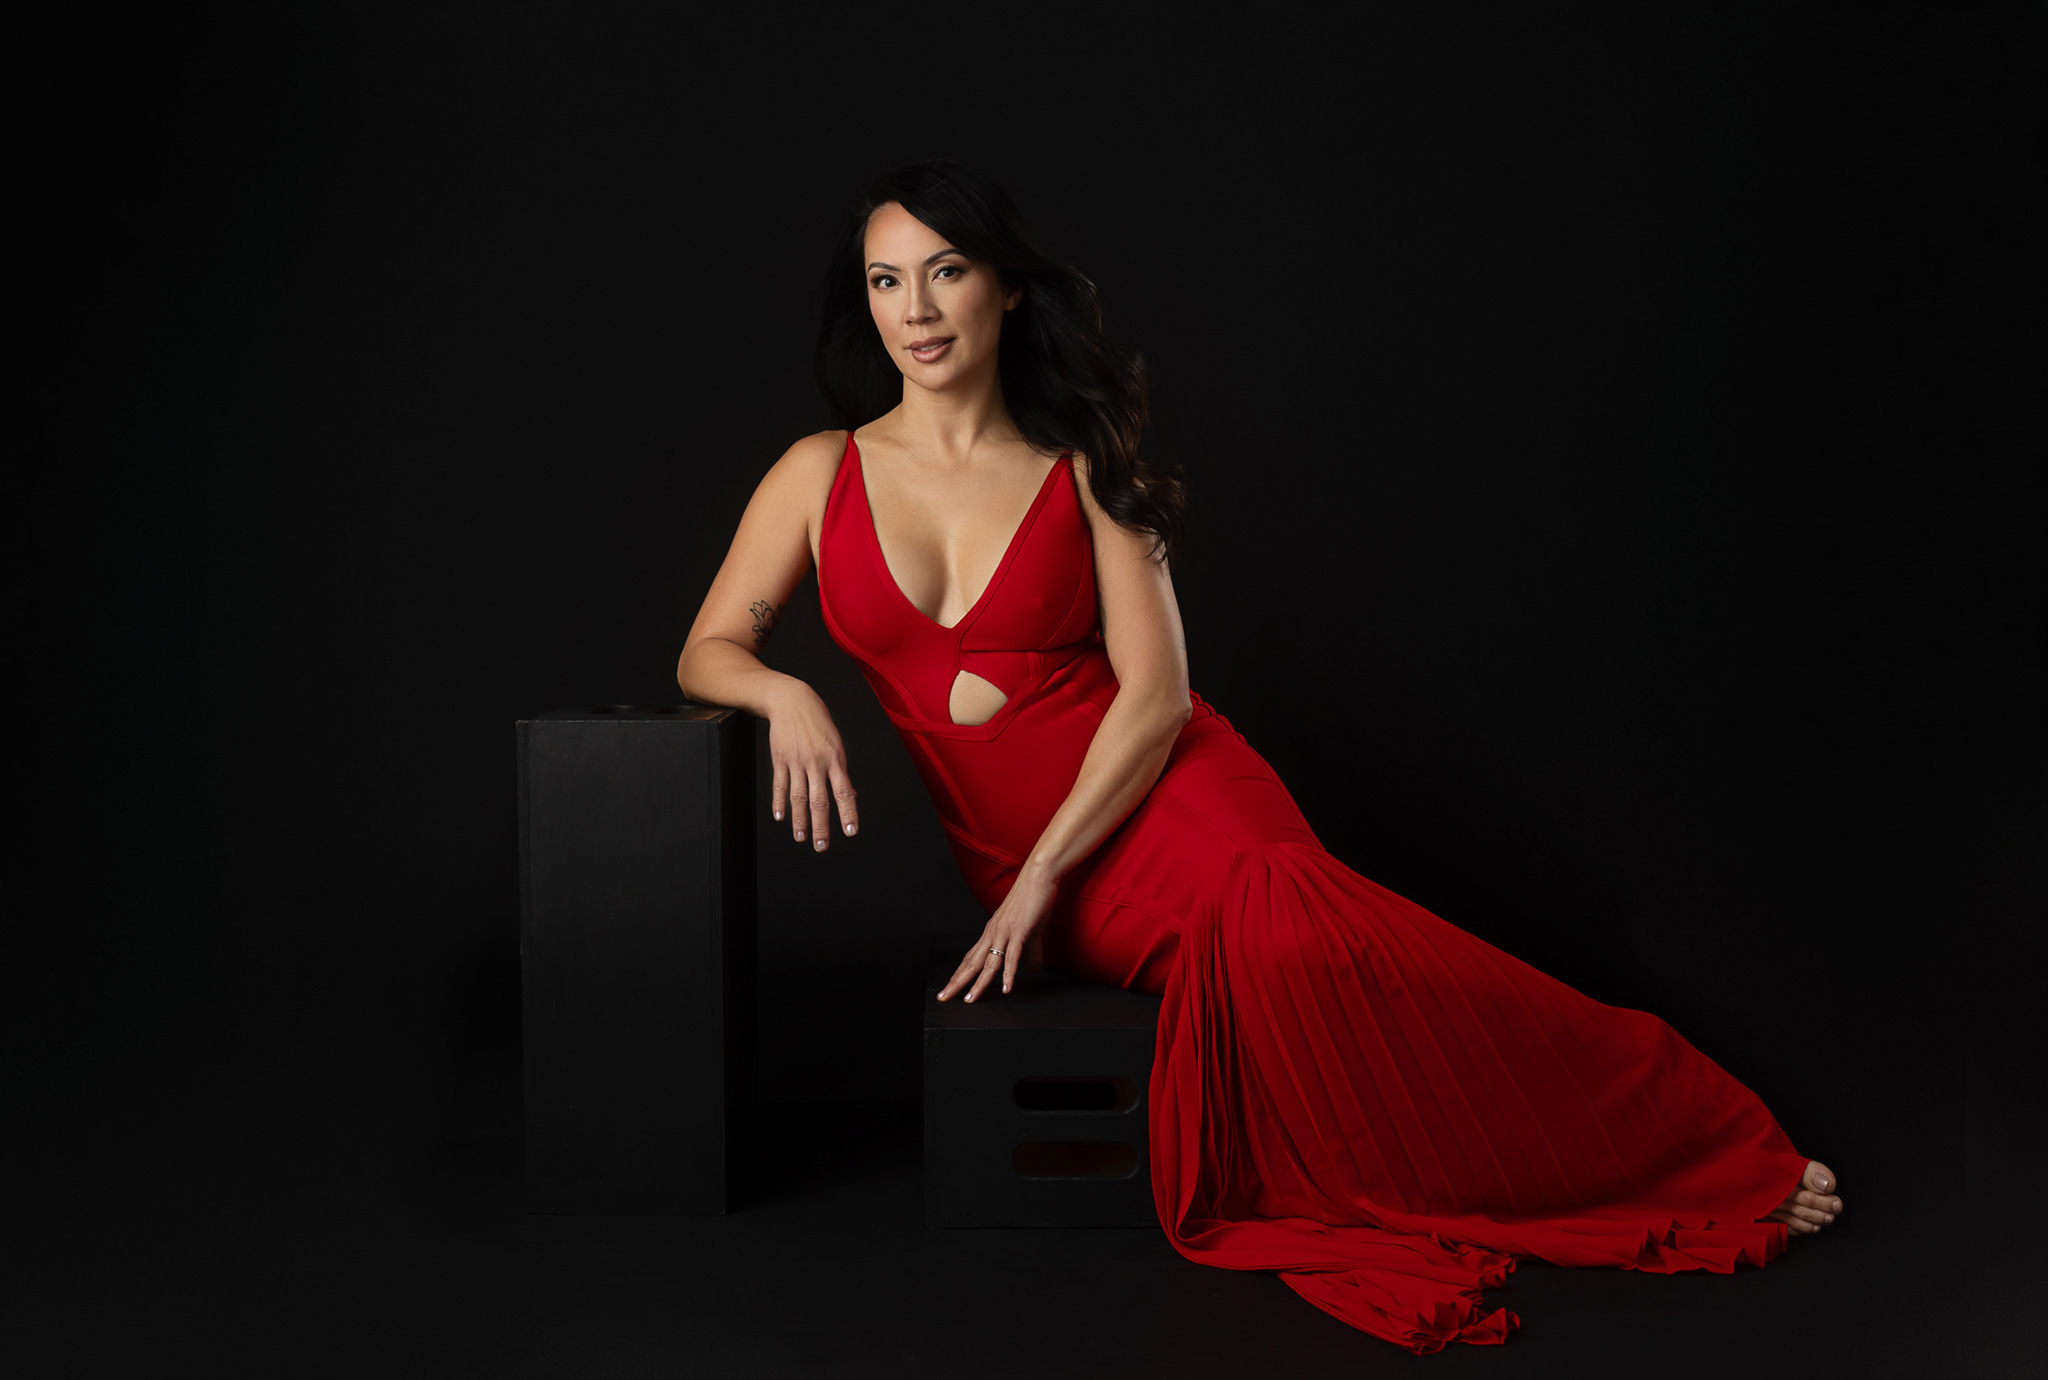 Professional photography shows a beautiful portrait of an Asian woman wearing a red gown over black backdrop